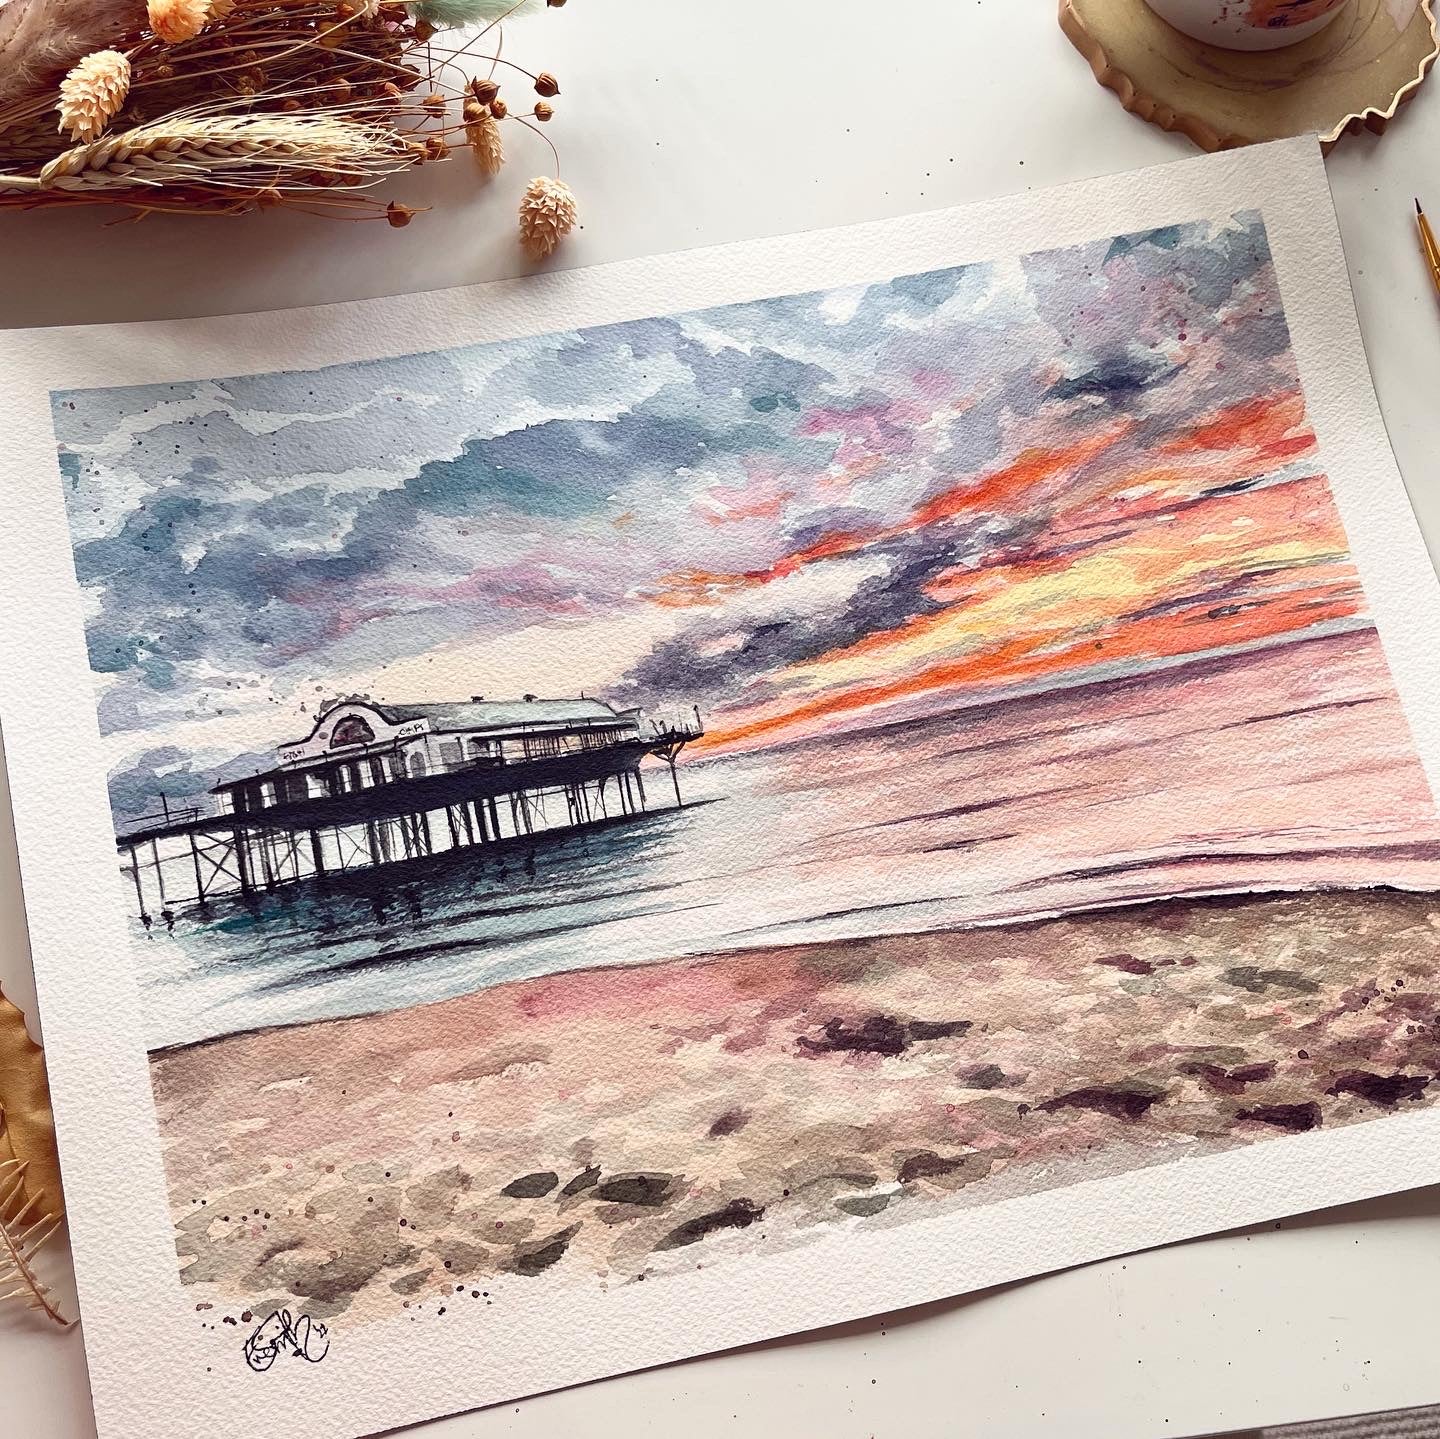 An original watercolour painting of the Cleethorpes pier at sunset on Cleethorpes beach, by Lincolnshire artist, Eve Leoni Smith.